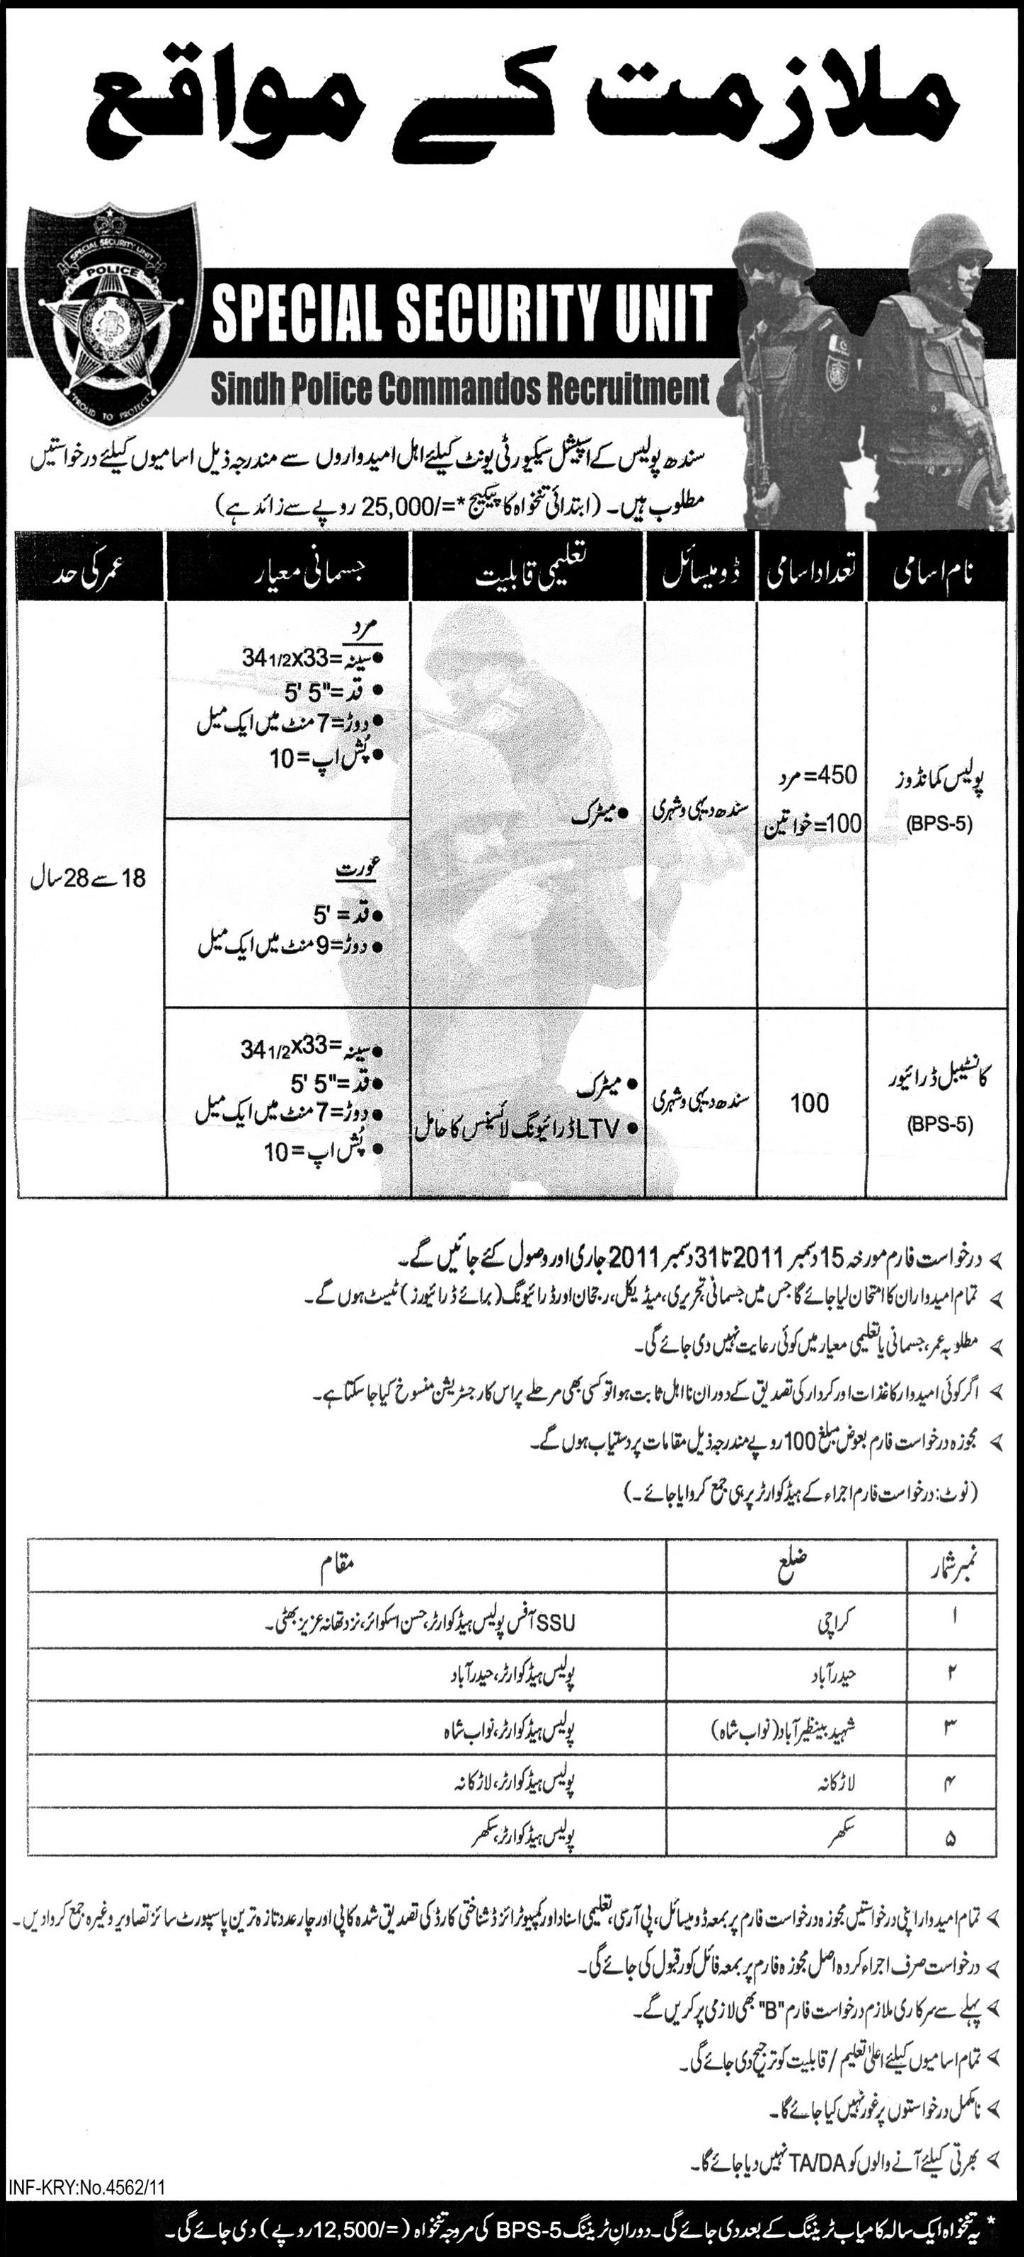 Special Security Unit, Sindh Police Commandos Jobs Opportunities